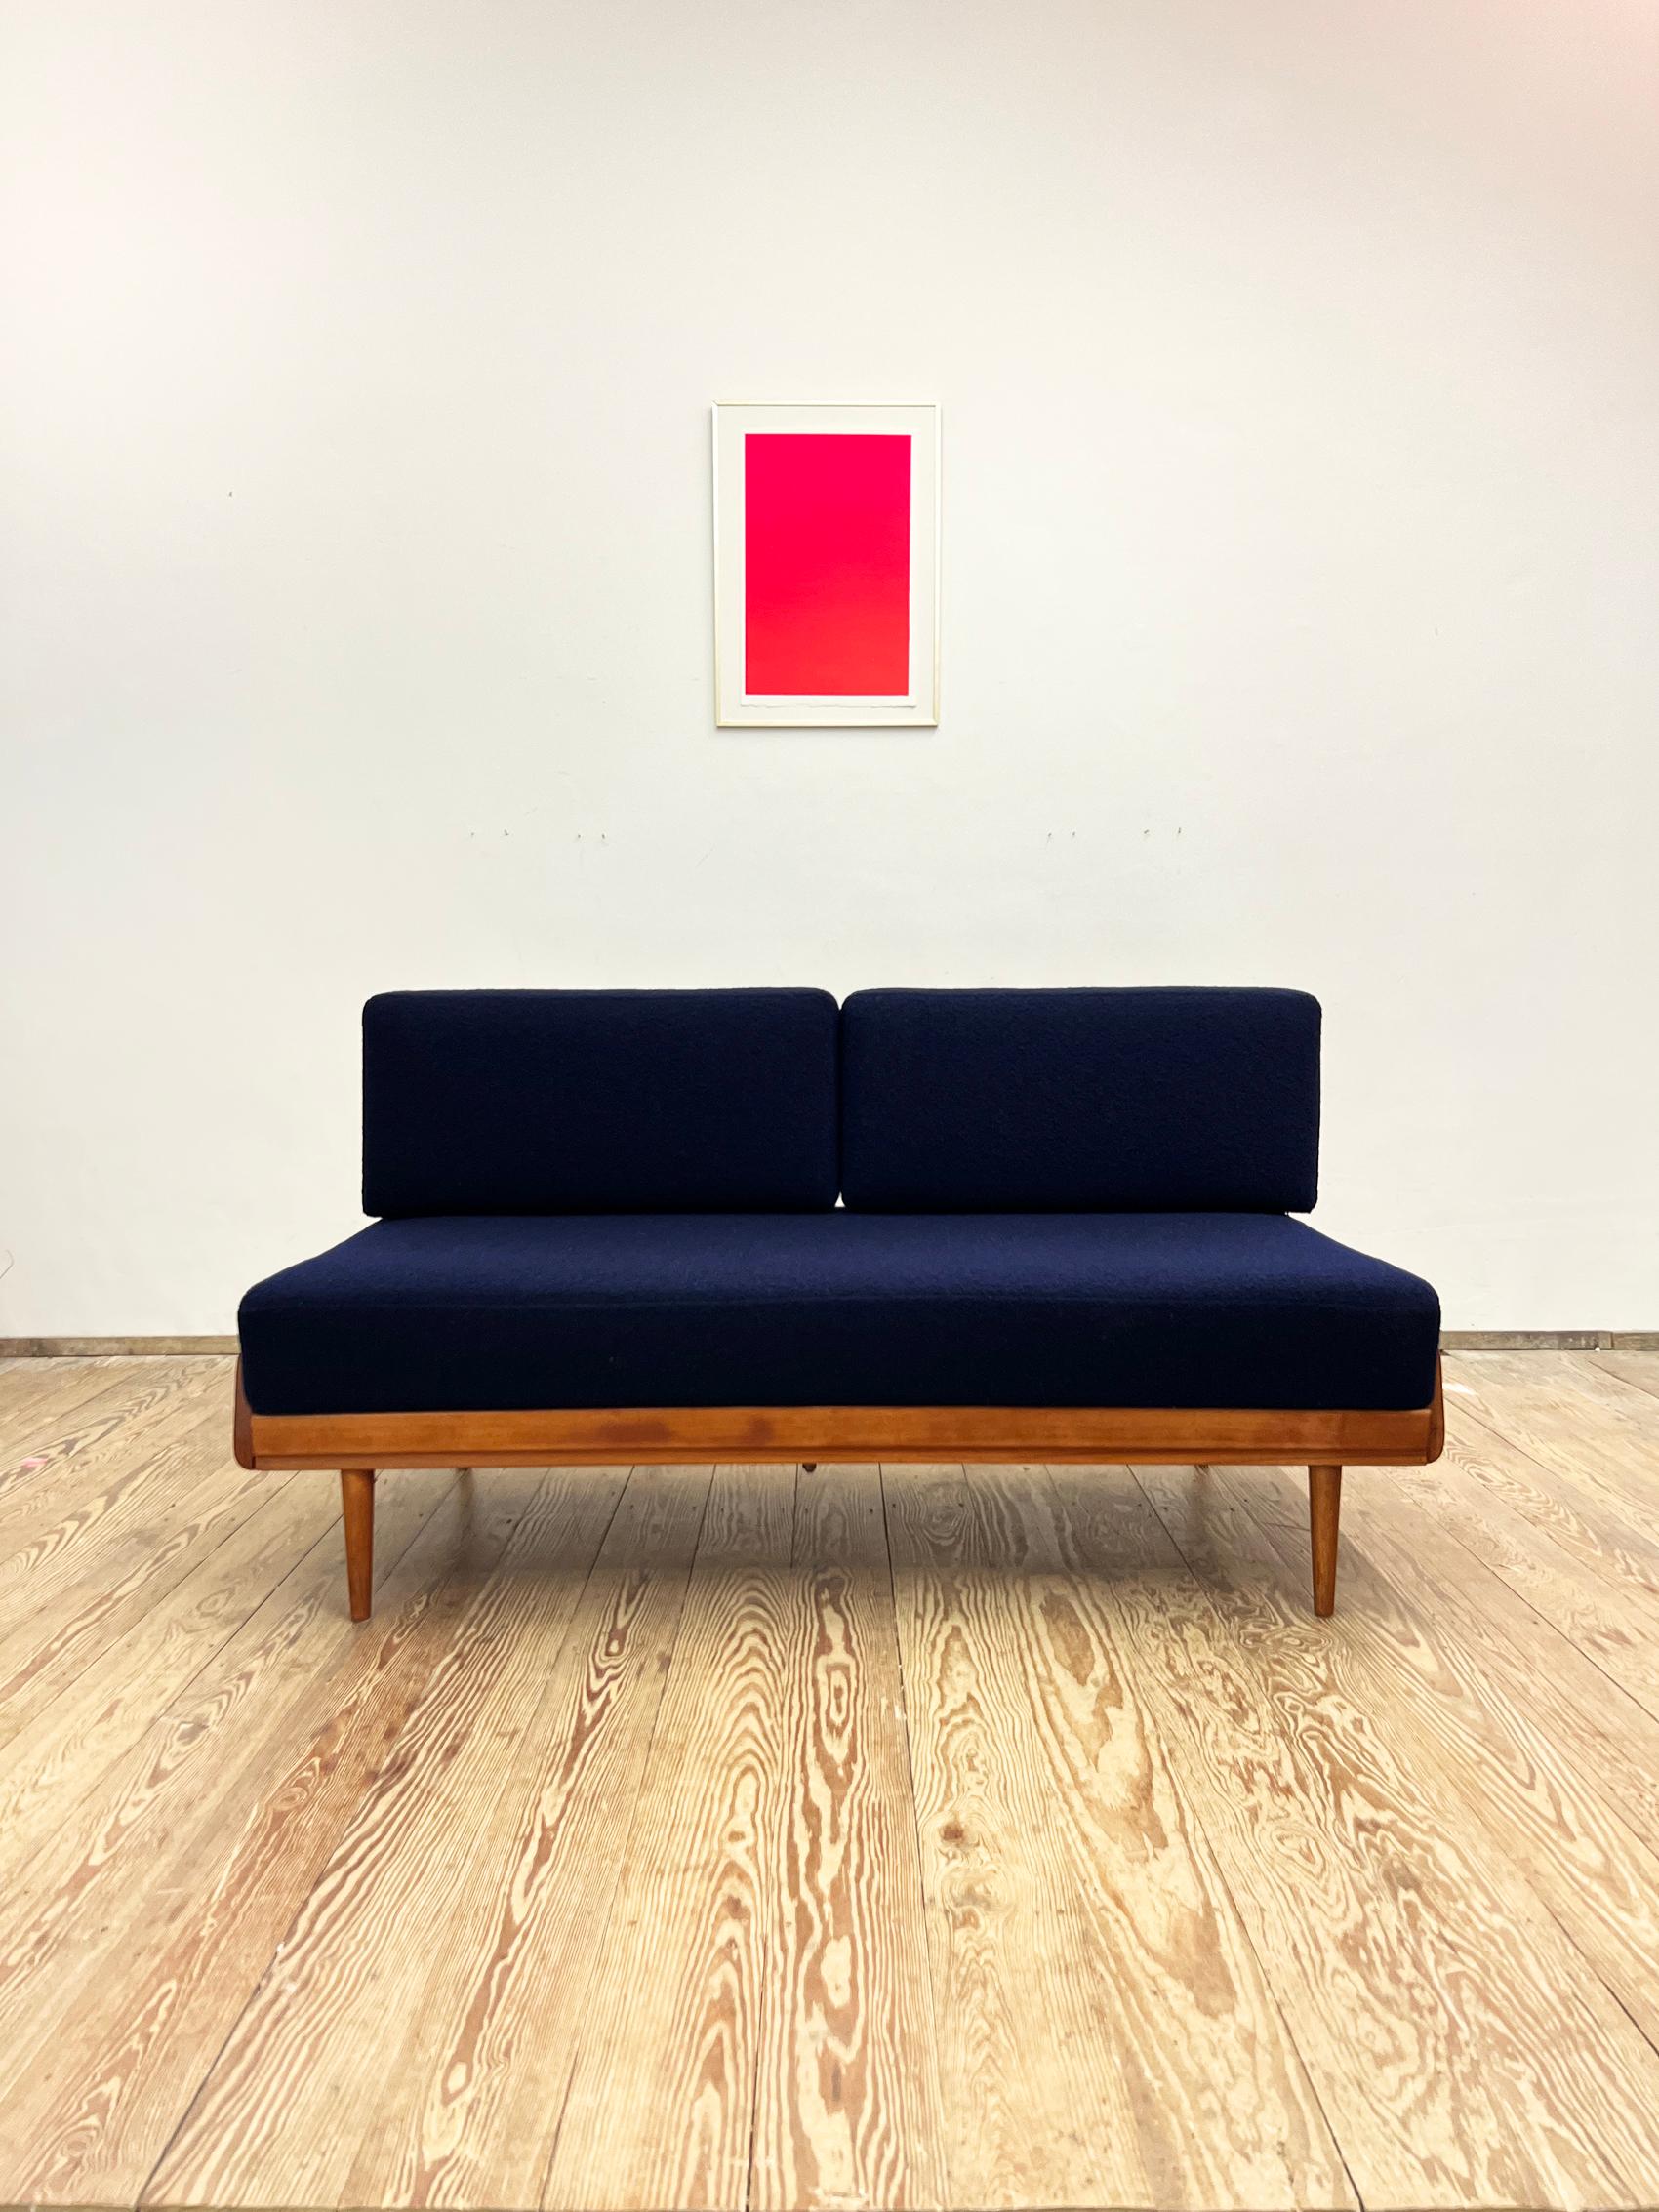 Dimensions 165-205 x 80 x 44 / 78 cm (Width x Depth x Seat Height /Height)

This shapely and comfortable sofa is part of the Antimott series and was designed and manufactured by Walter Knoll in the 1950s in Germany. The Mid-Century daybed comes with